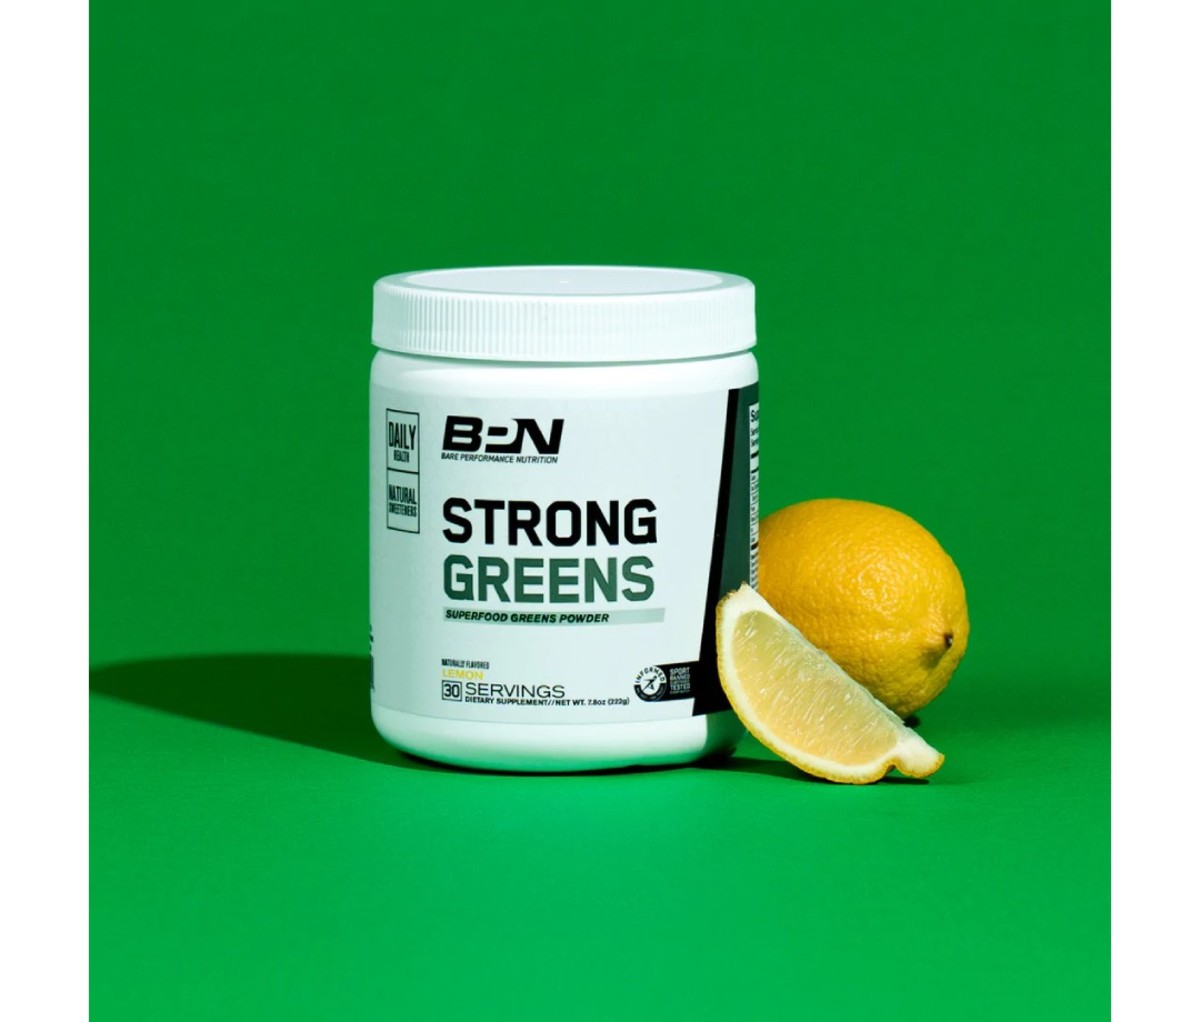 White bottle of greens supplement next to a sliced lemon on a green background.